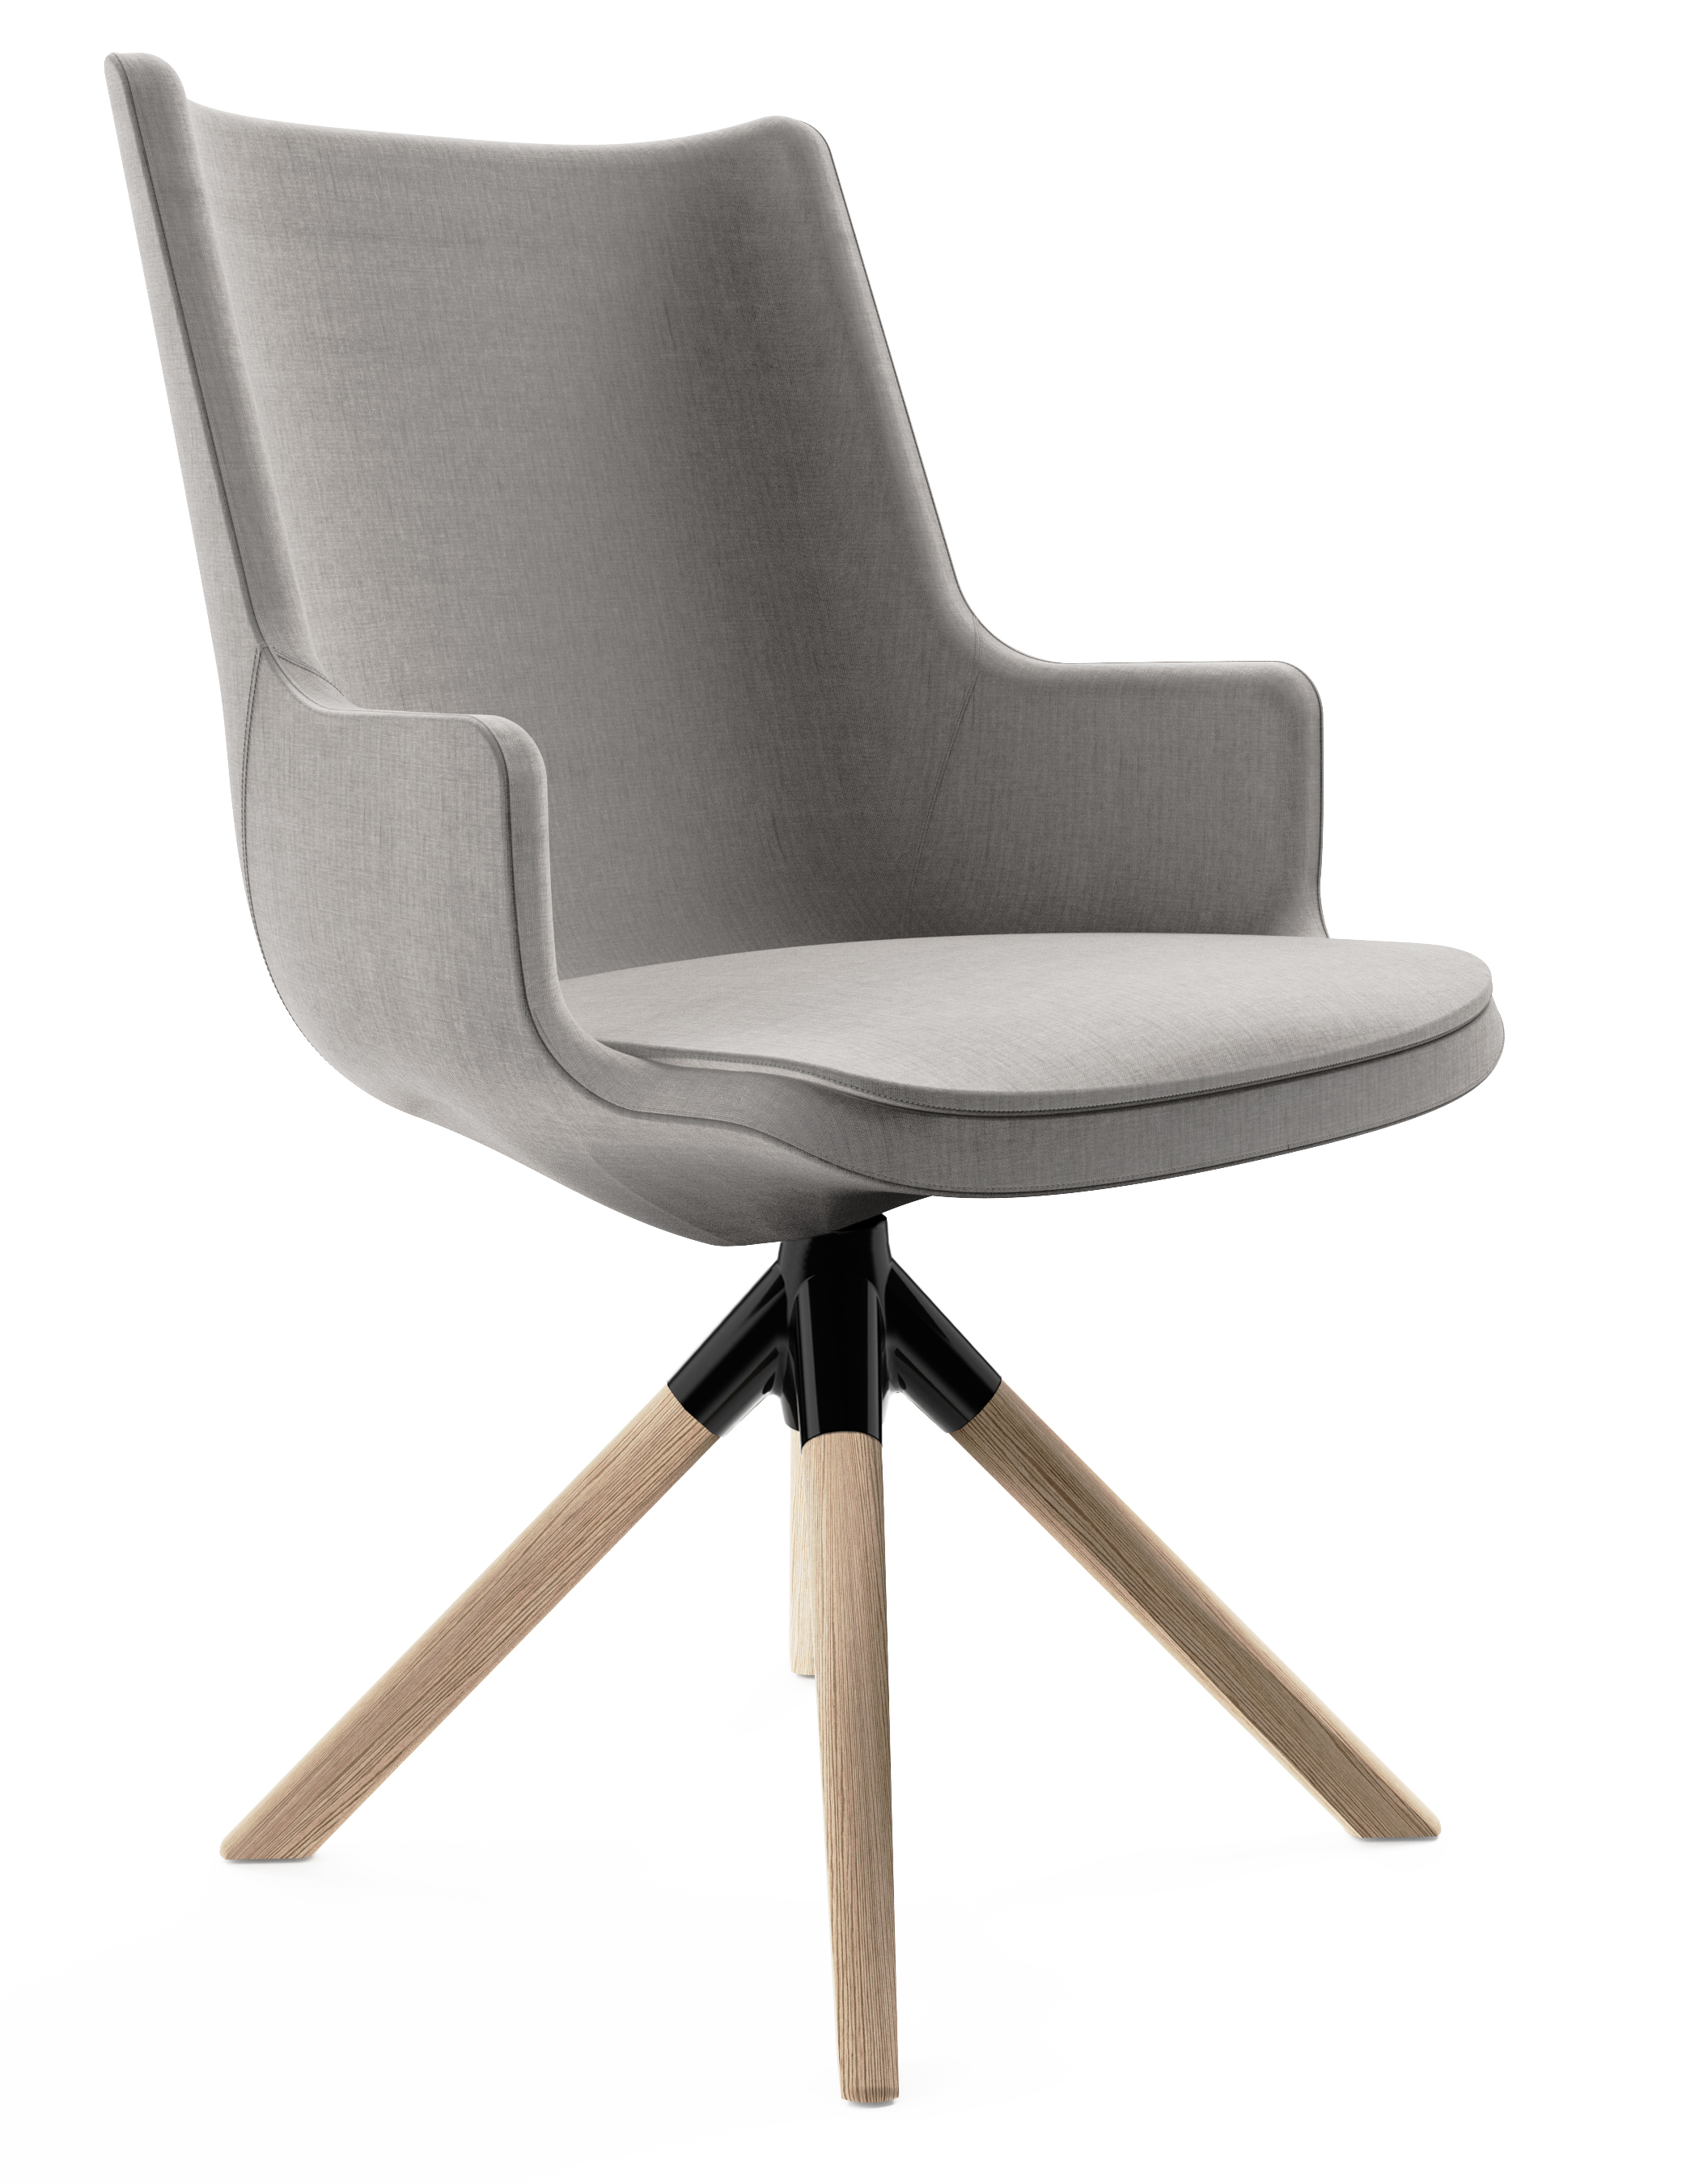 WS - Contour chair - Mid, 4-star - black timber base (Front angle)